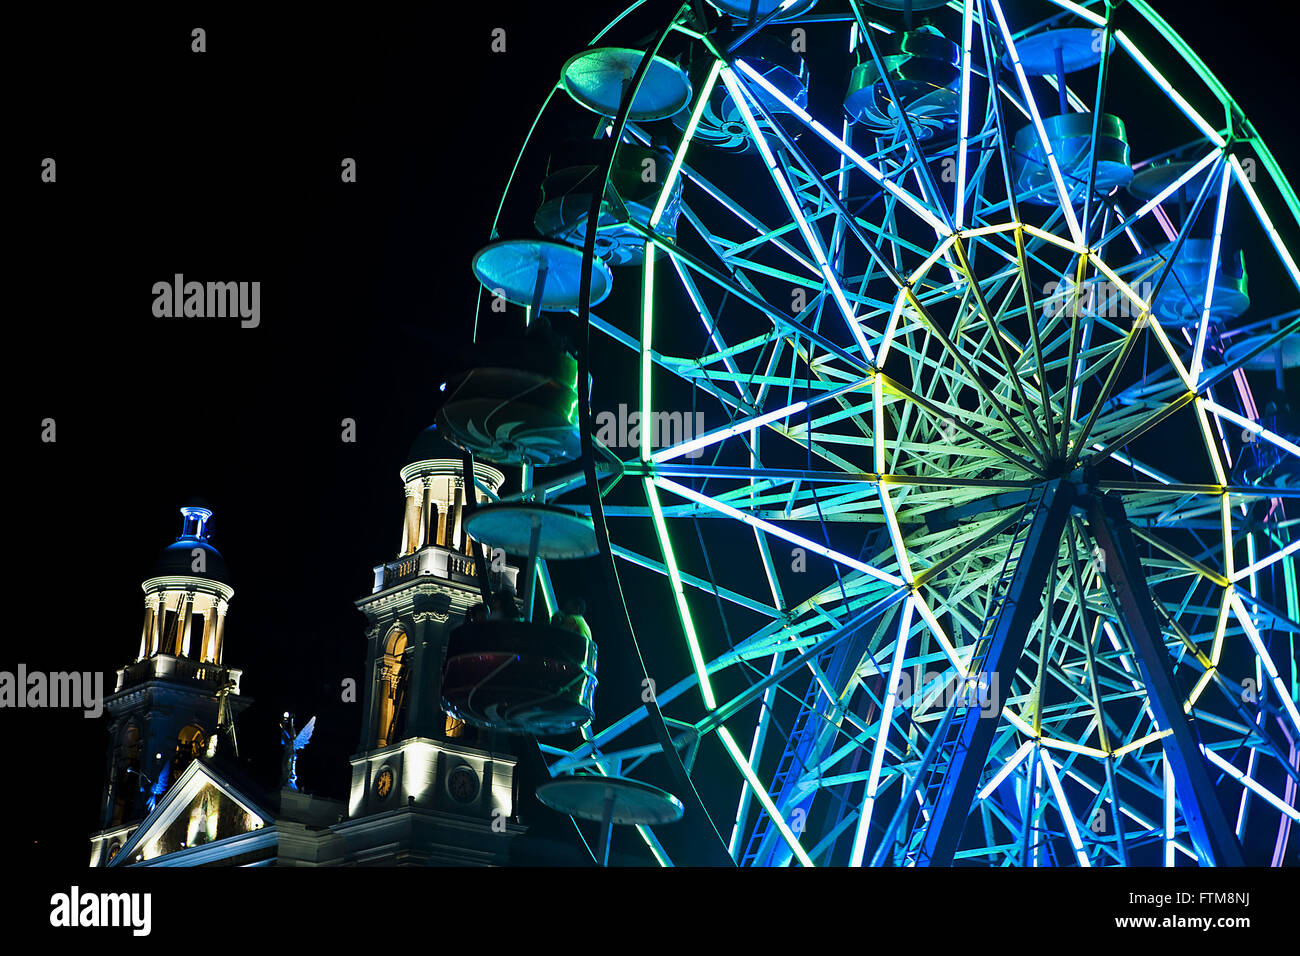 Night view of amusement park - Incidental Church of Our Lady of Nazare Stock Photo